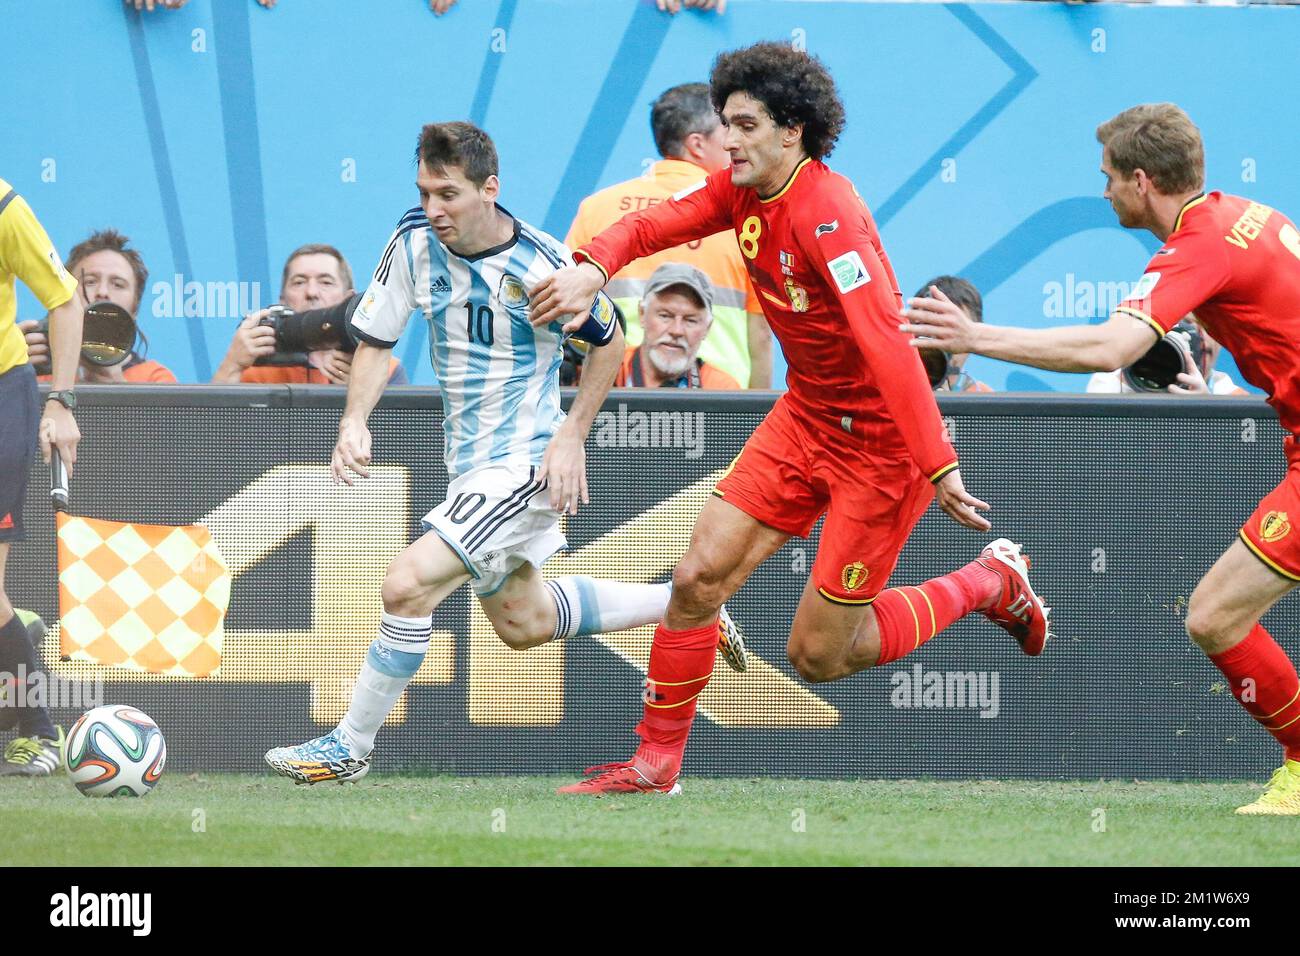 Argentina's Lionel Messi and Belgium's Marouane Fellaini fight for the ball during the quarter final match between Belgian national soccer team Red Devils and Argentina, in Estadio Nacional Mane Garrincha, in Brasilia, Brazil, during the 2014 FIFA World Cup, Saturday 05 July 2014. BELGA PHOTO BRUNO FAHY Stock Photo